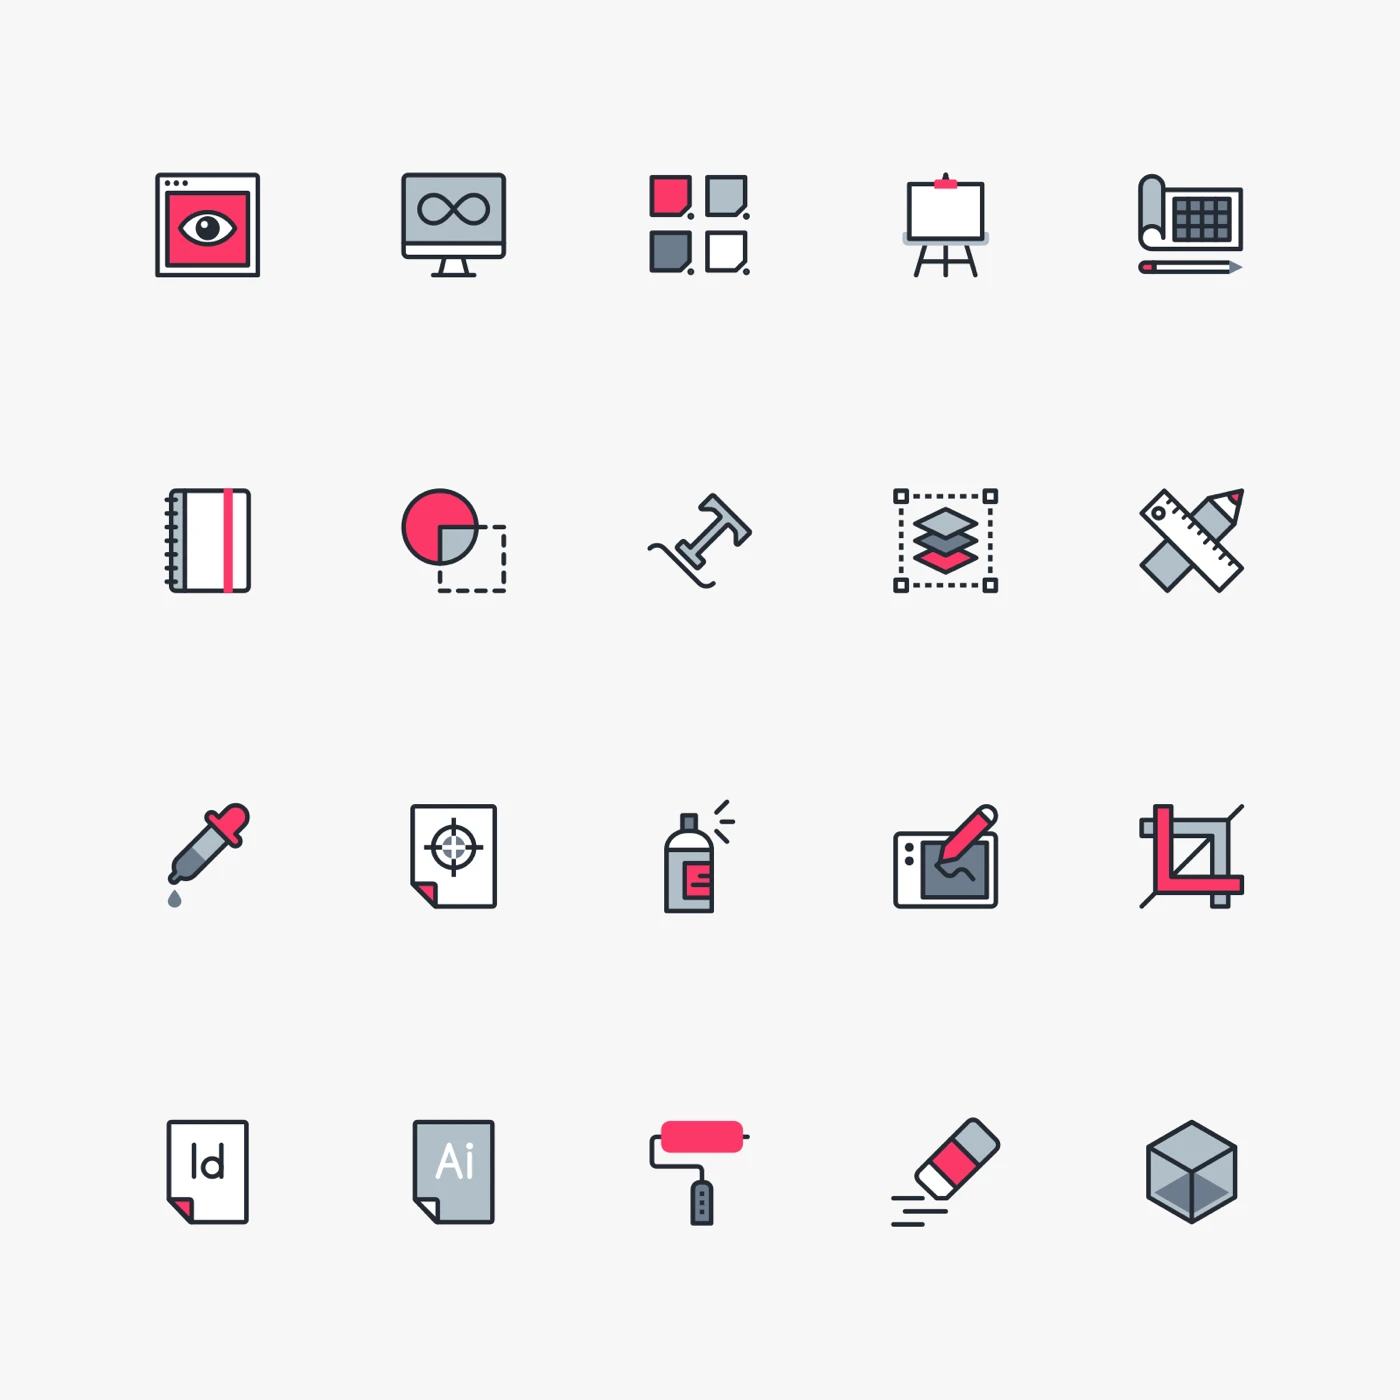 Design Tools Free Icon Pack - Grab this free icon pack with 20 graphic design & freelance-related icons. Comes in four colors—black, white, gray, and hot pink.